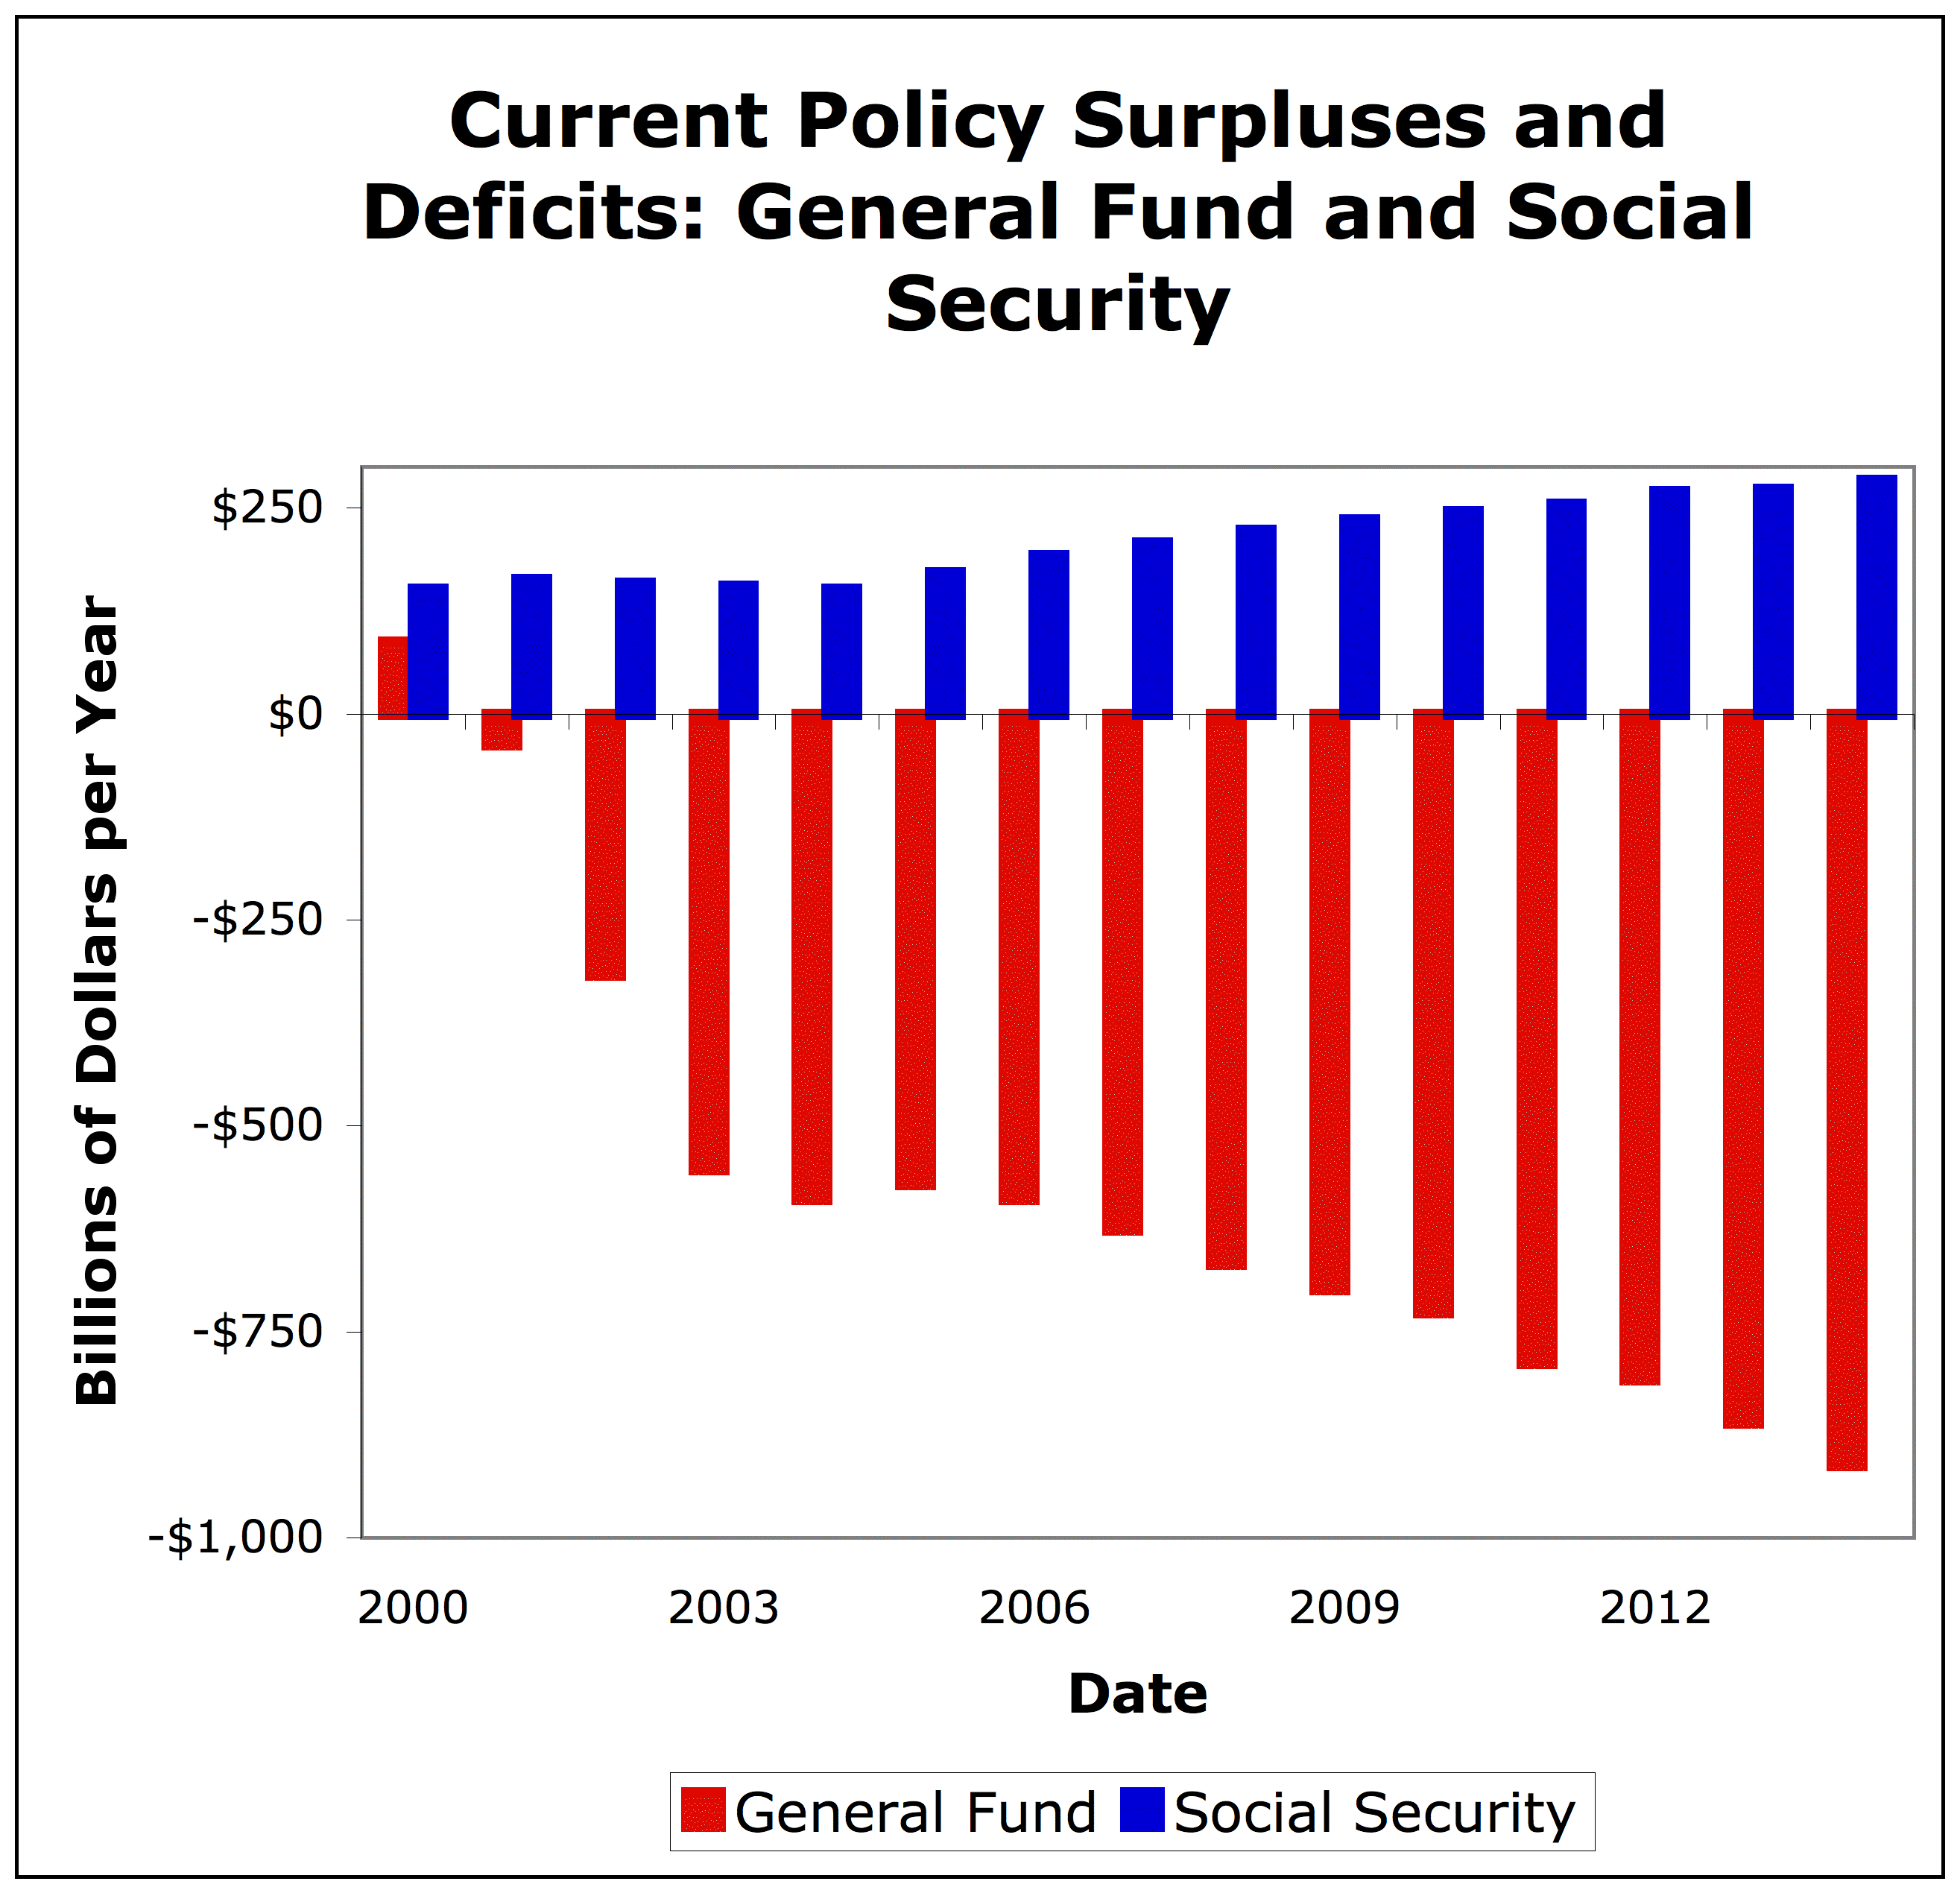 Current Policy Surpluses and Deficits: General Fund and Social Security